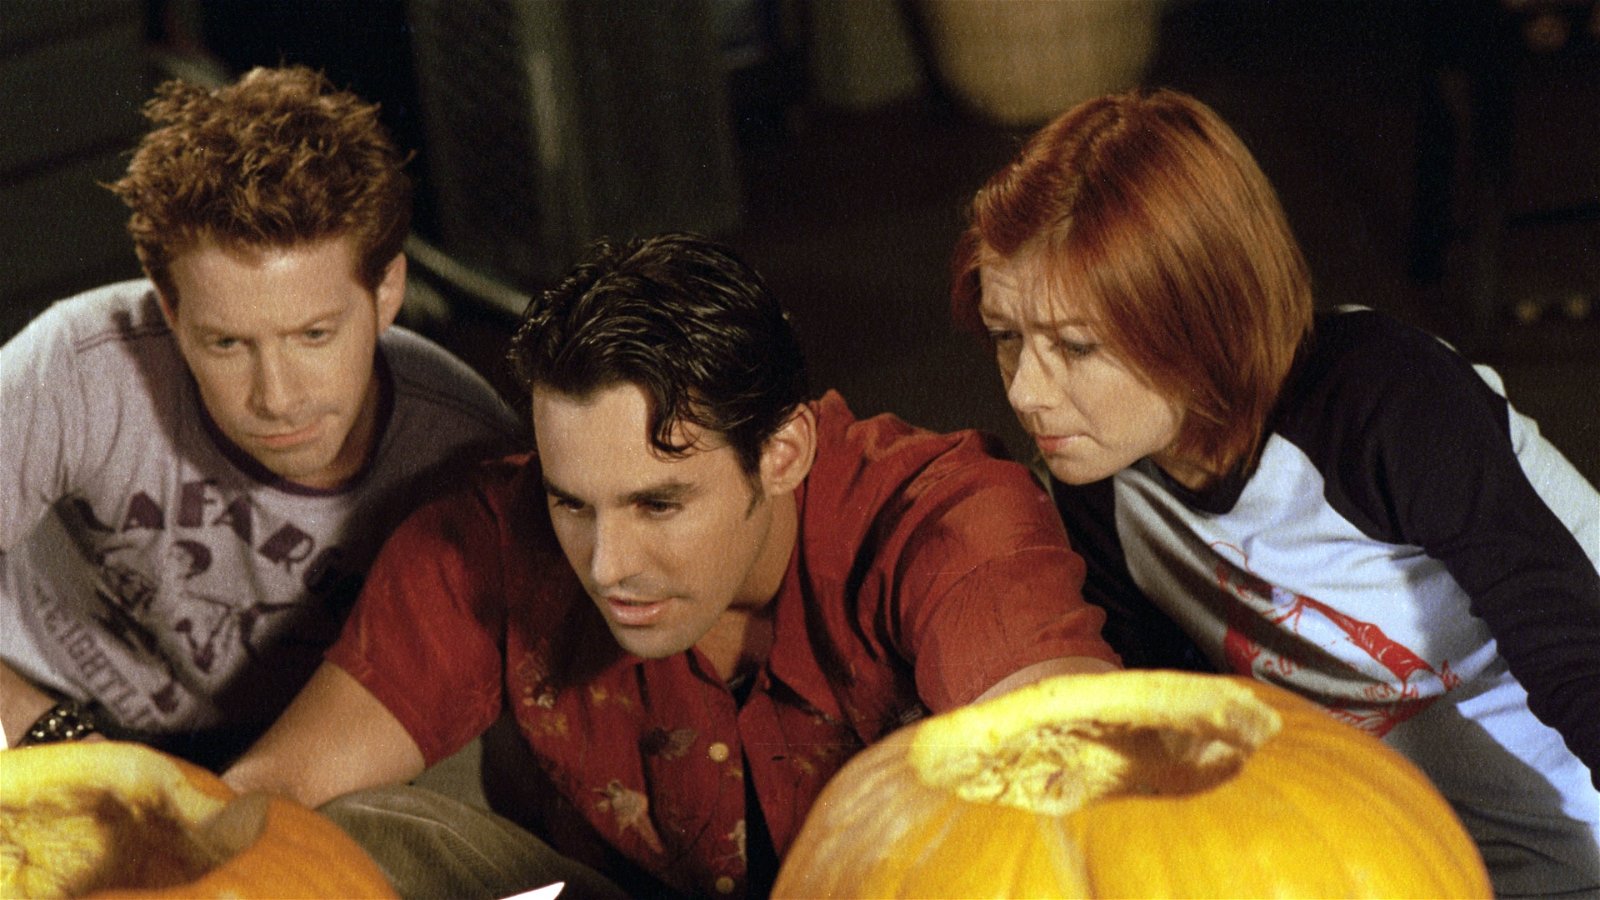 The 10 Best Shows Known For Their Halloween Episodes 9